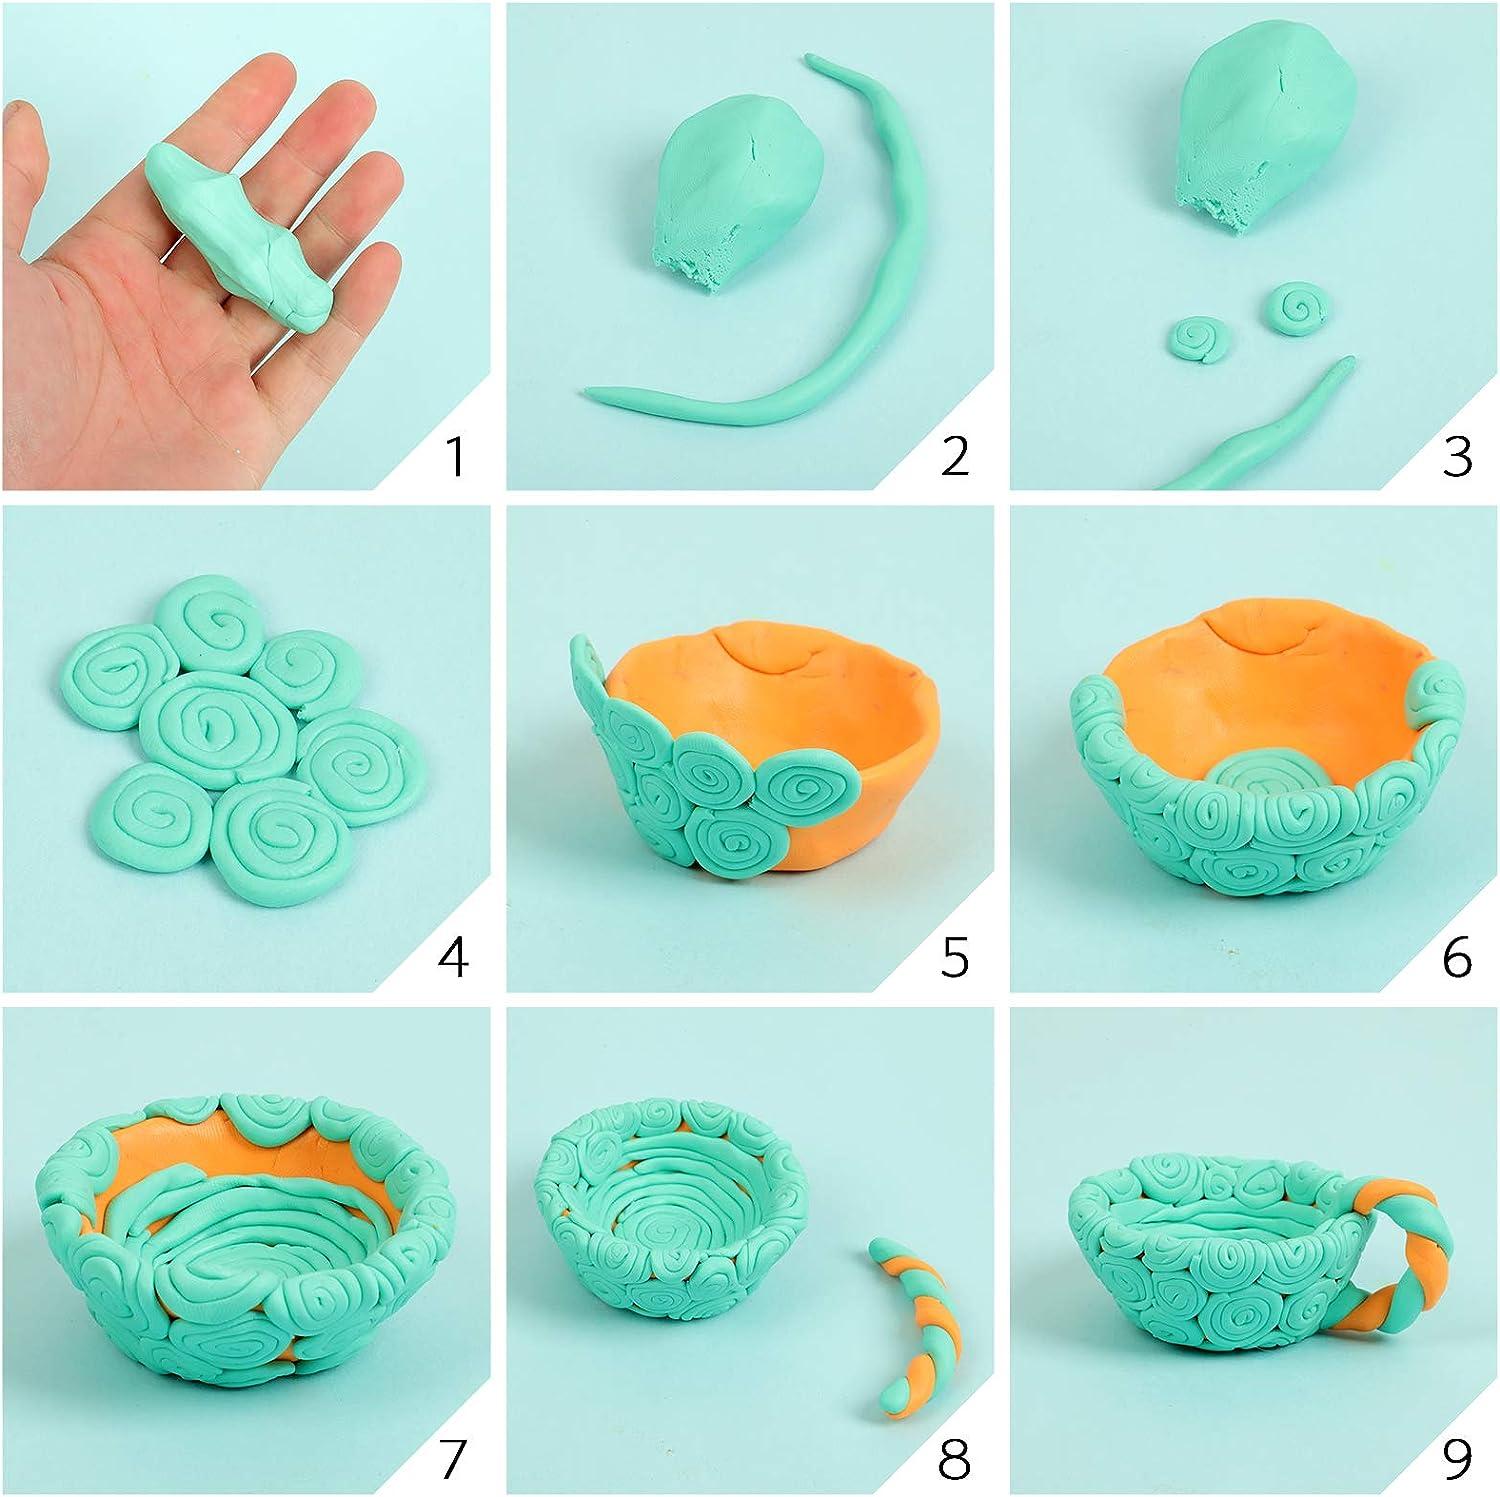 Aestd-ST Polymer Clay 50 Colors, Modeling Clay for Kids DIY India